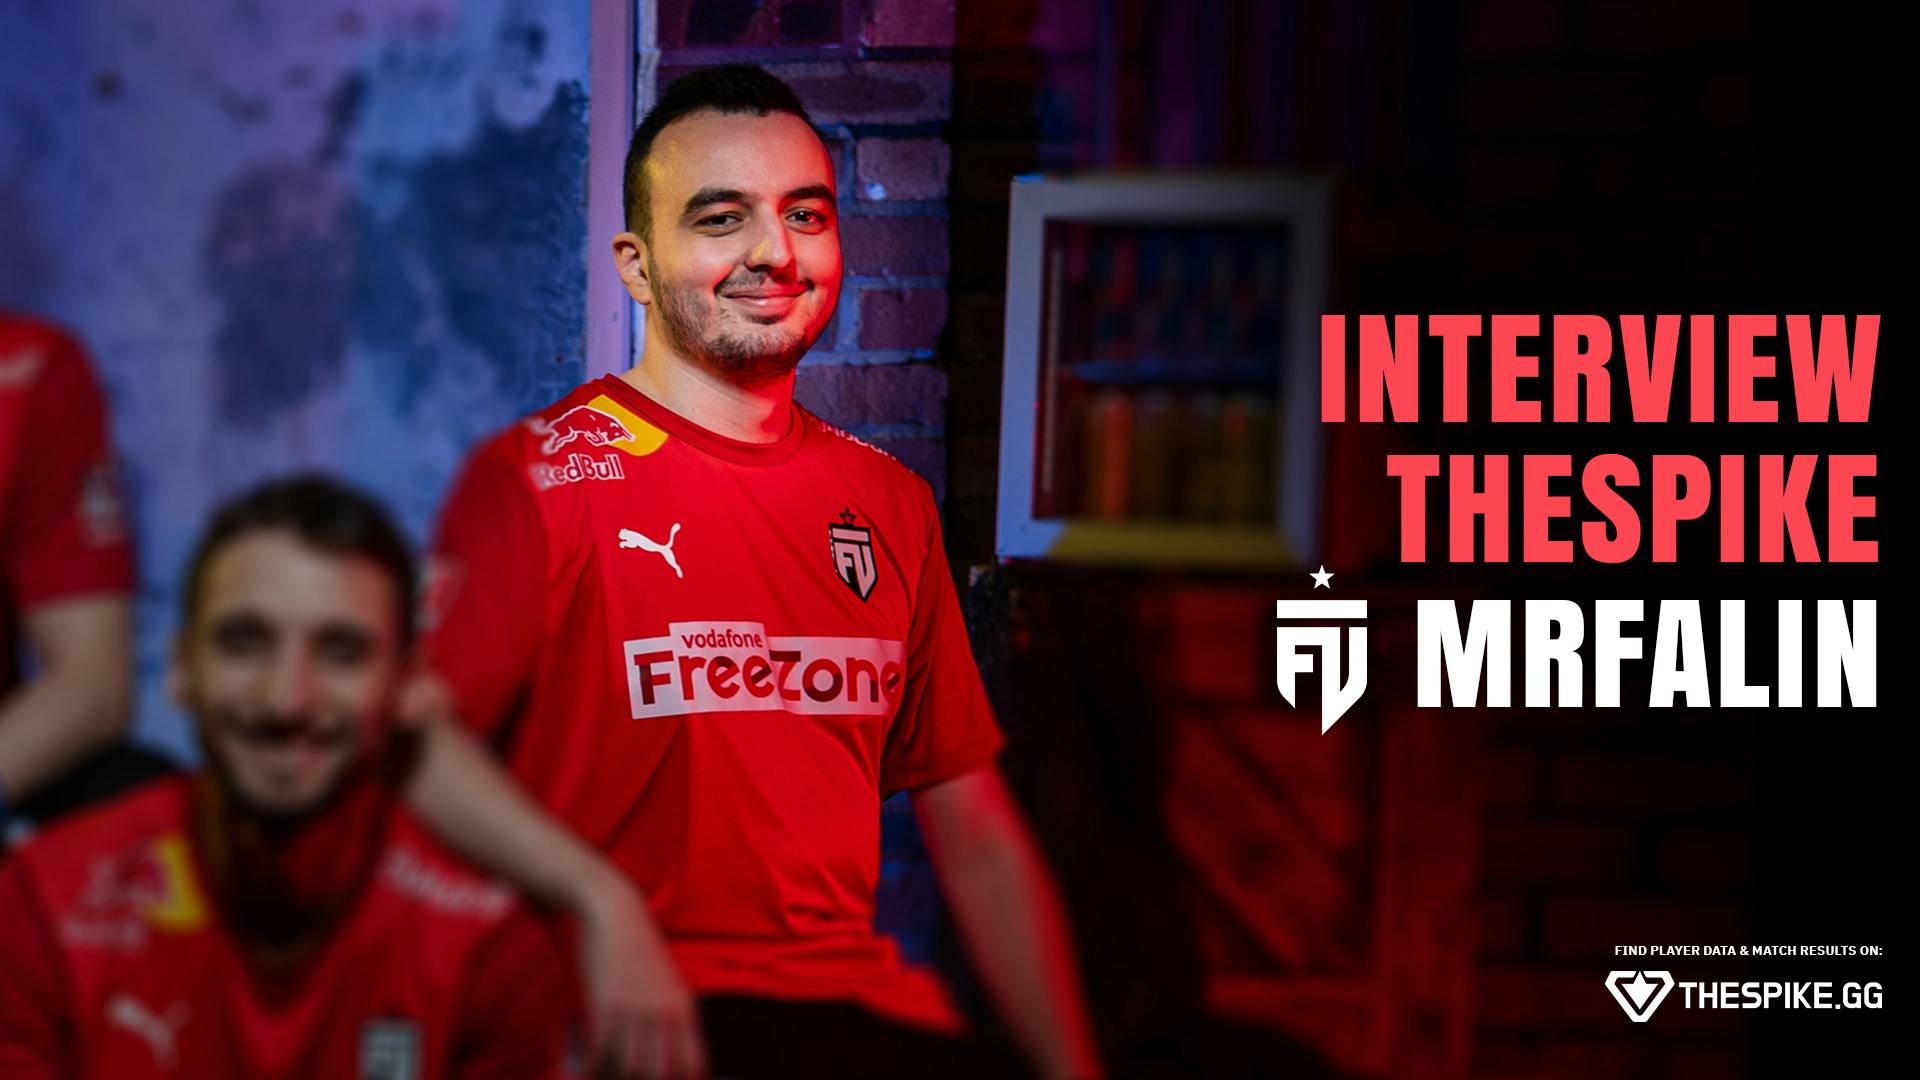 "We are excited and very hopeful for Berlin." - Interview with FUT Esports MrFaliN